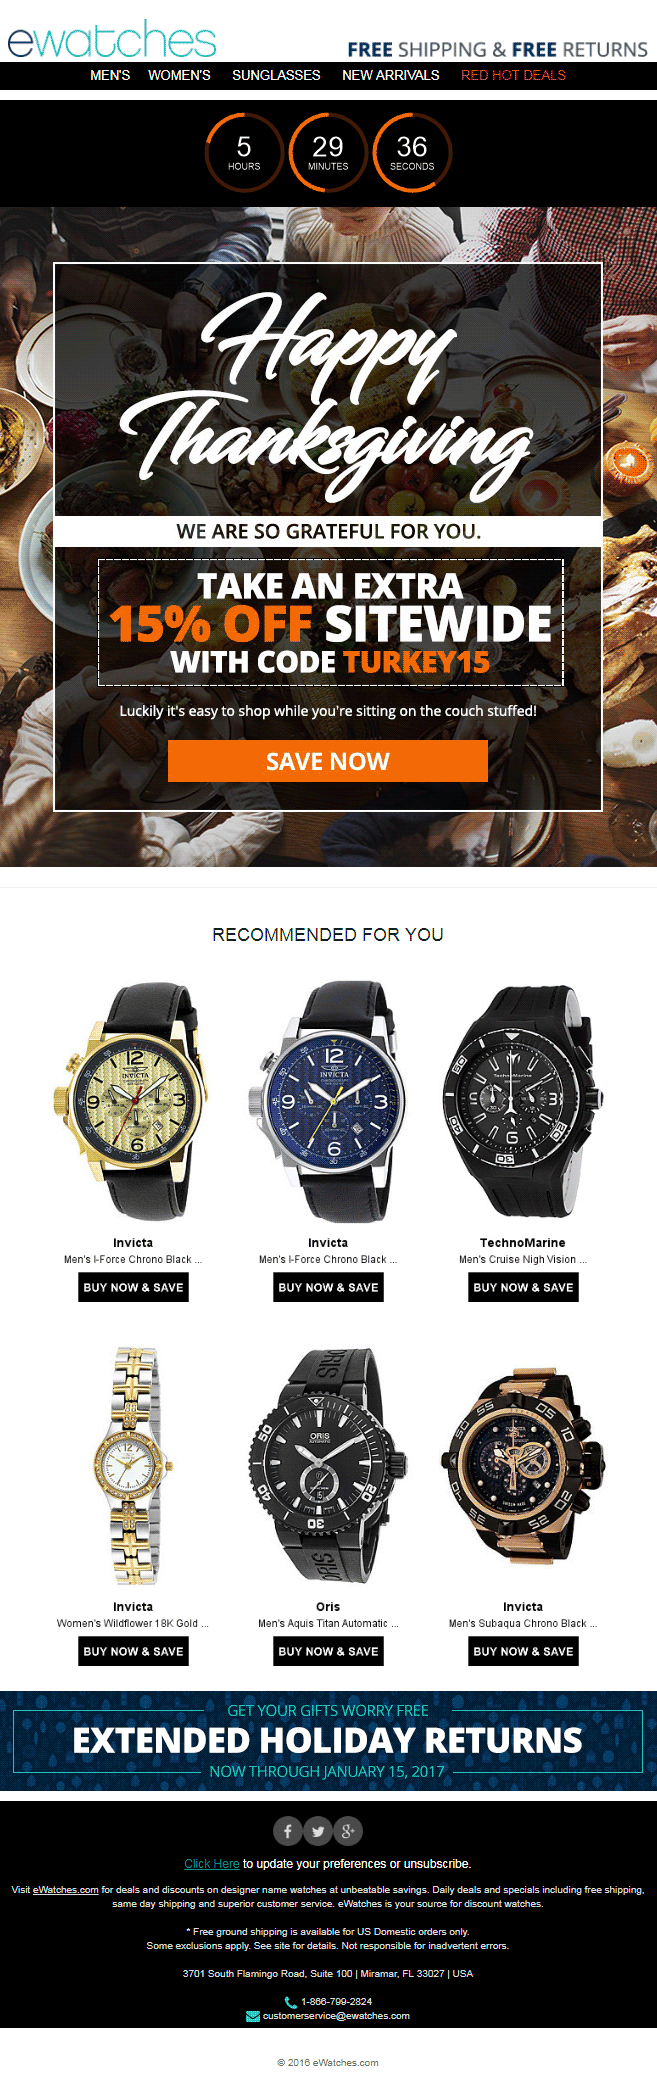 eWatches_thanksgiving email